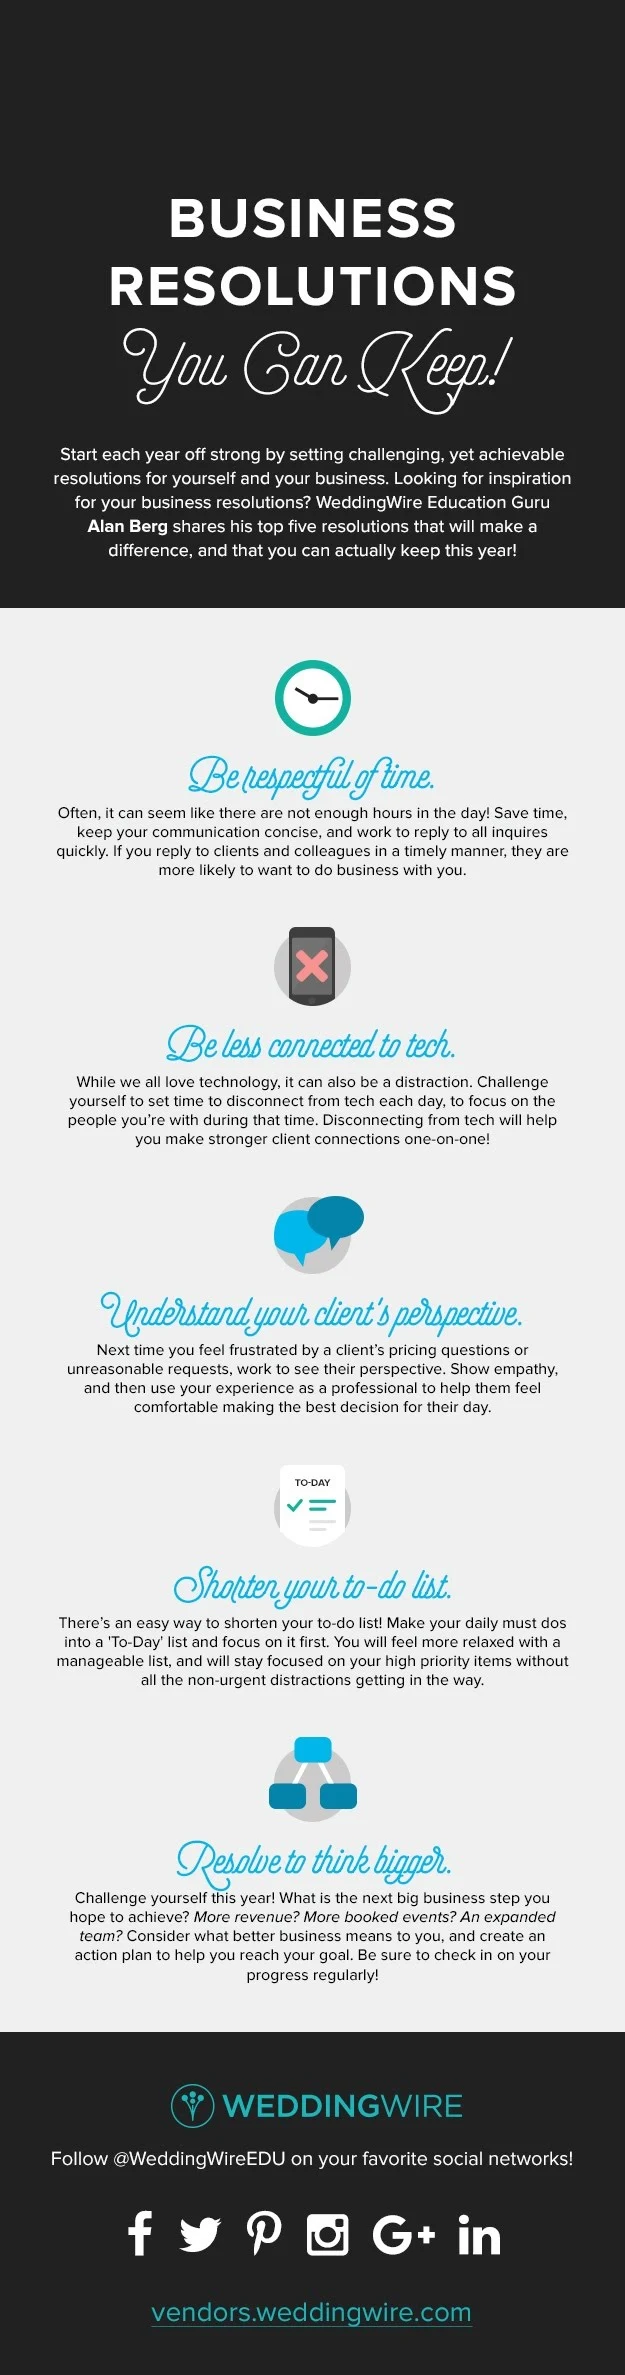 Five Business Resolutions That You Can Keep - #infographic